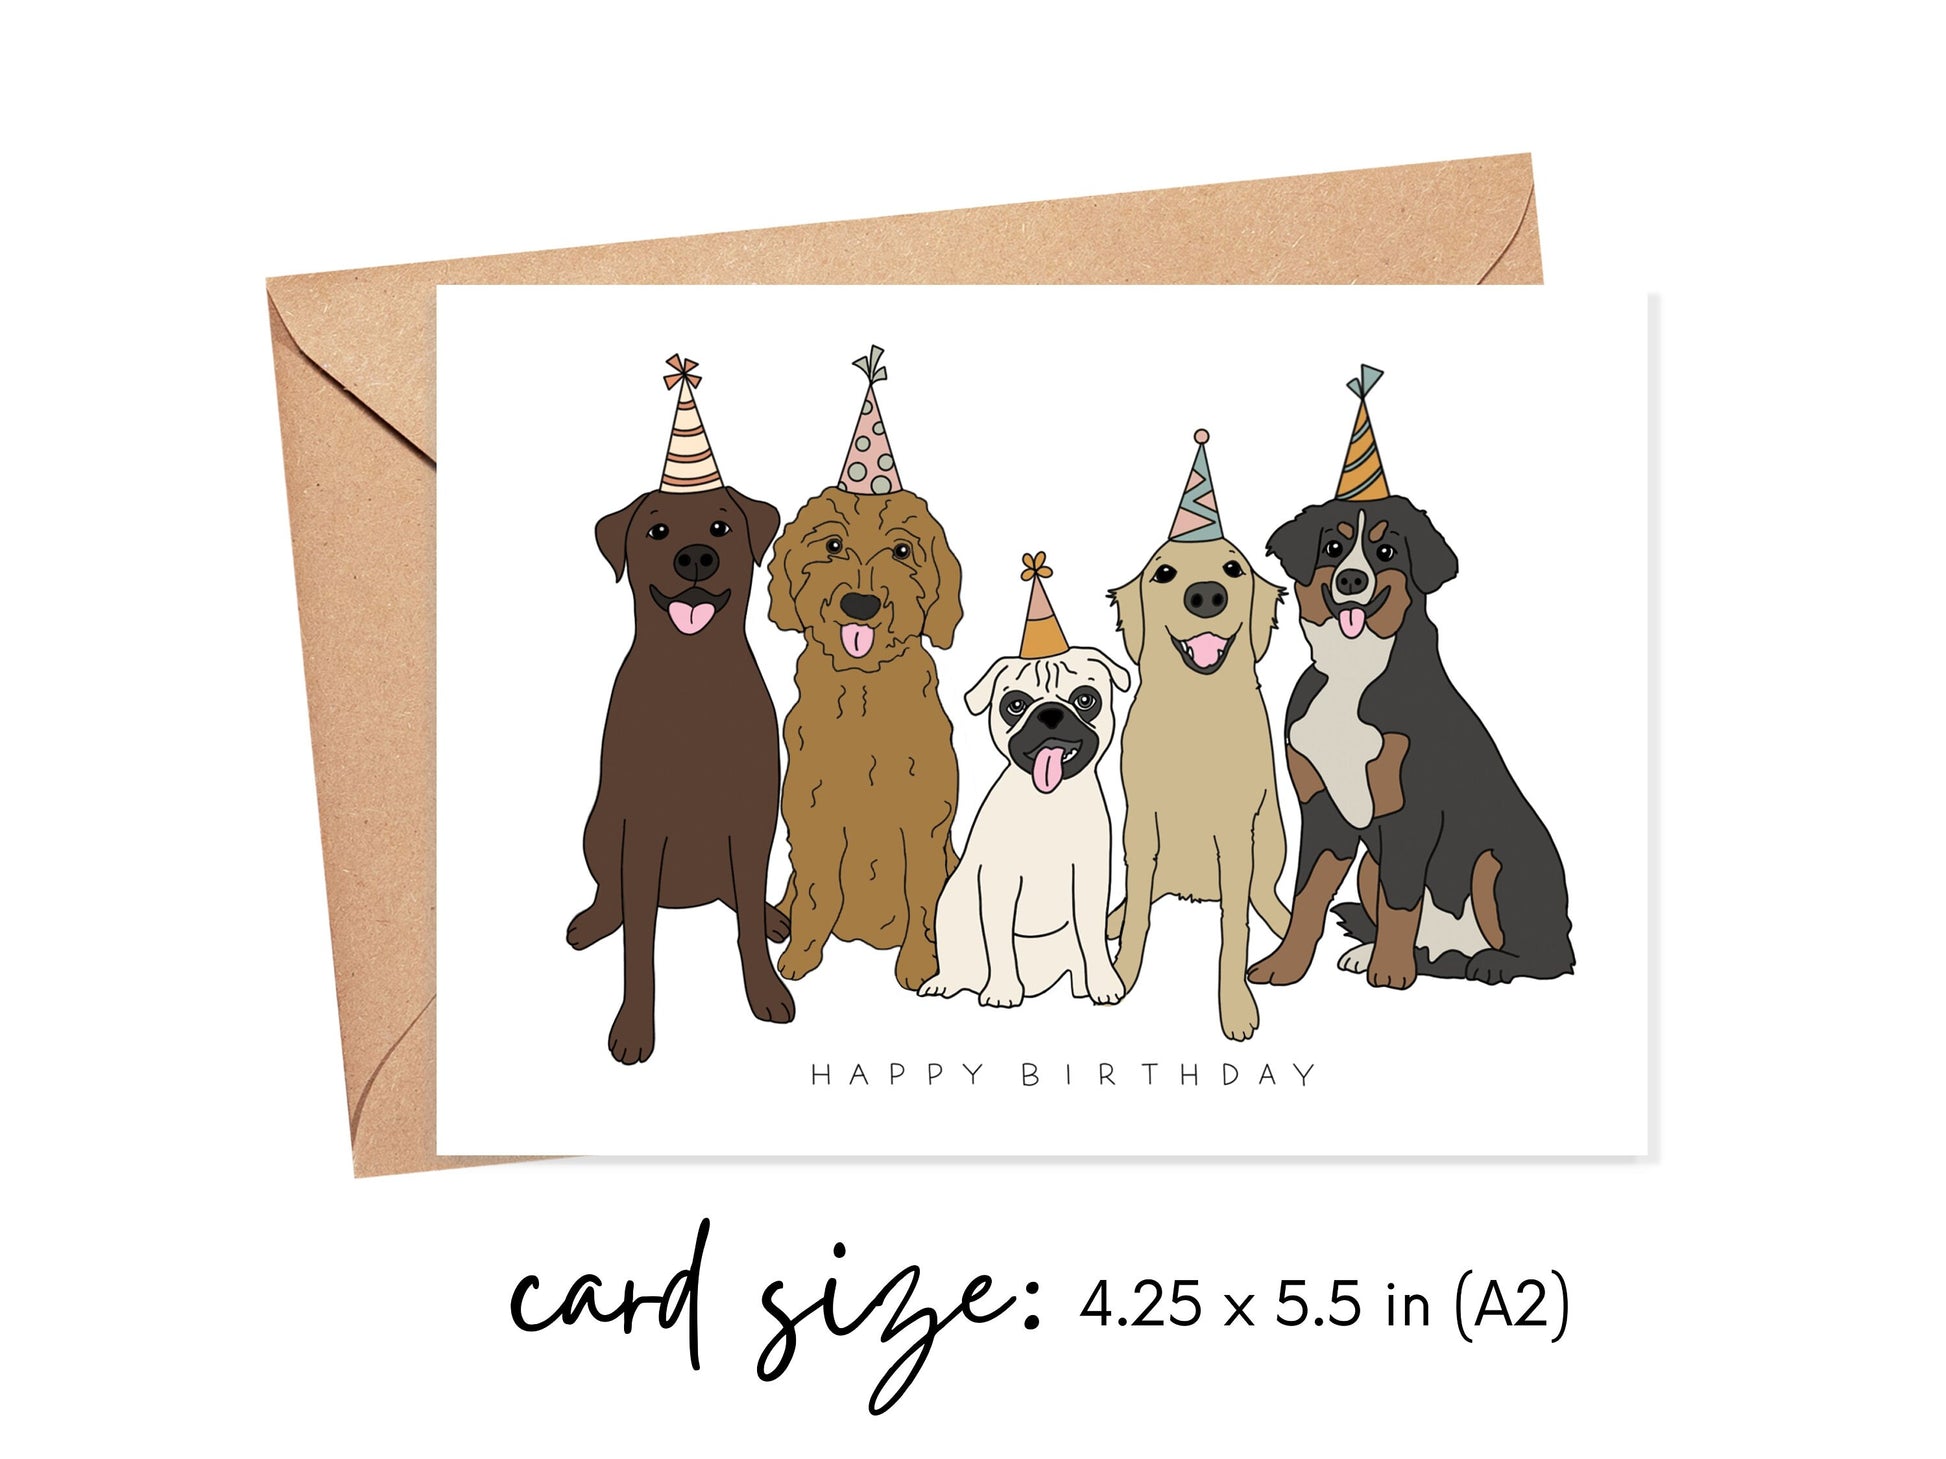 Happy Birthday Variety of Dogs Card Simply Happy Cards